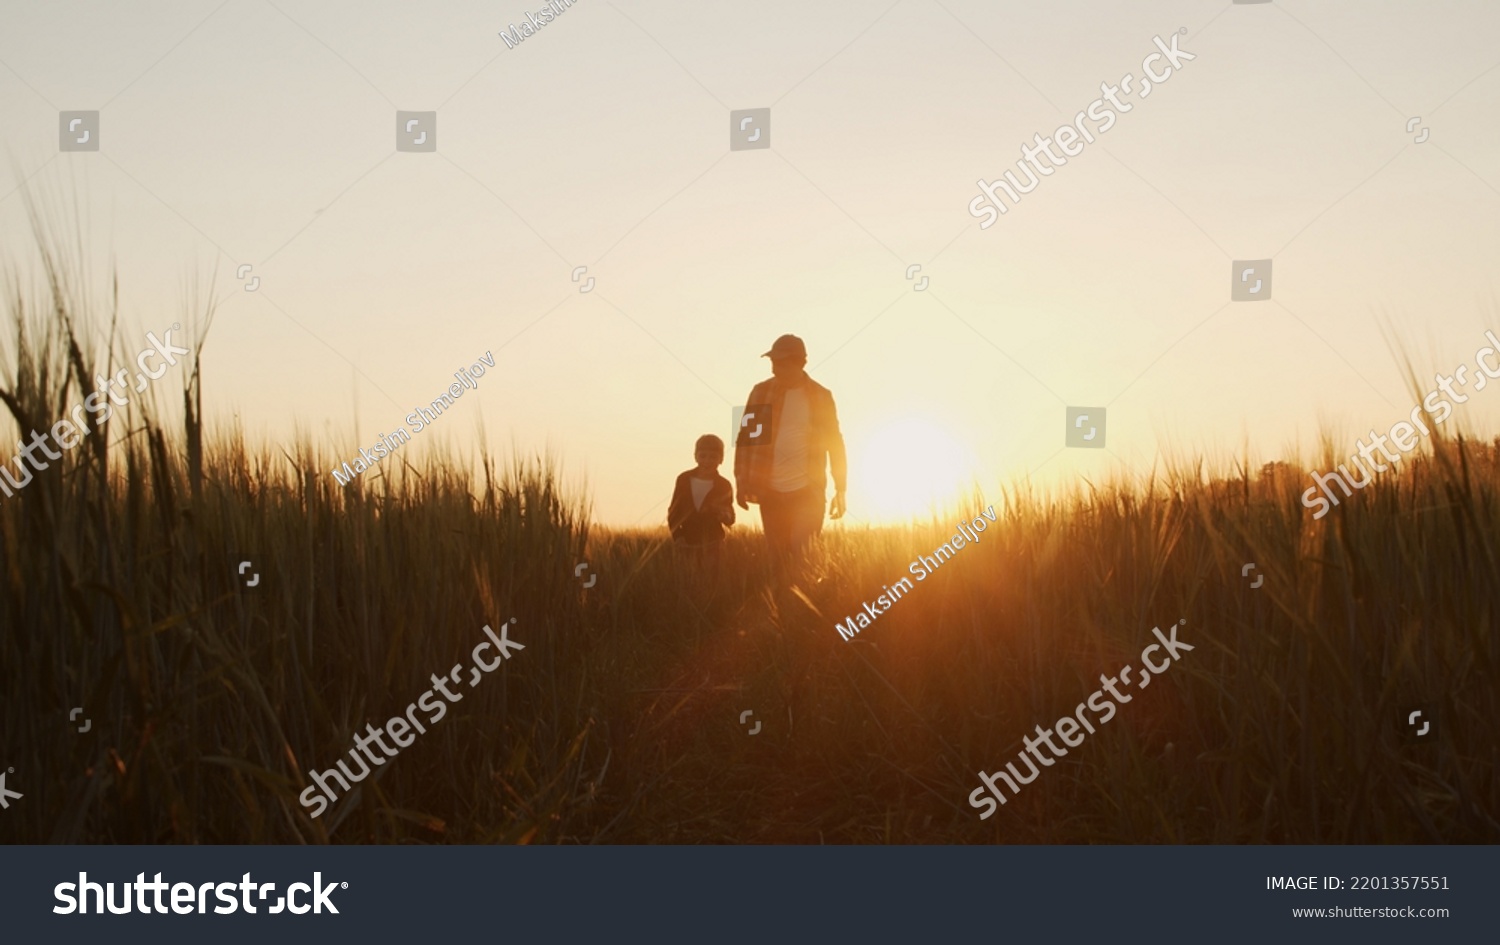 Farmer and his son in front of a sunset agricultural landscape. Man and a boy in a countryside field. Fatherhood, country life, farming and country lifestyle. #2201357551